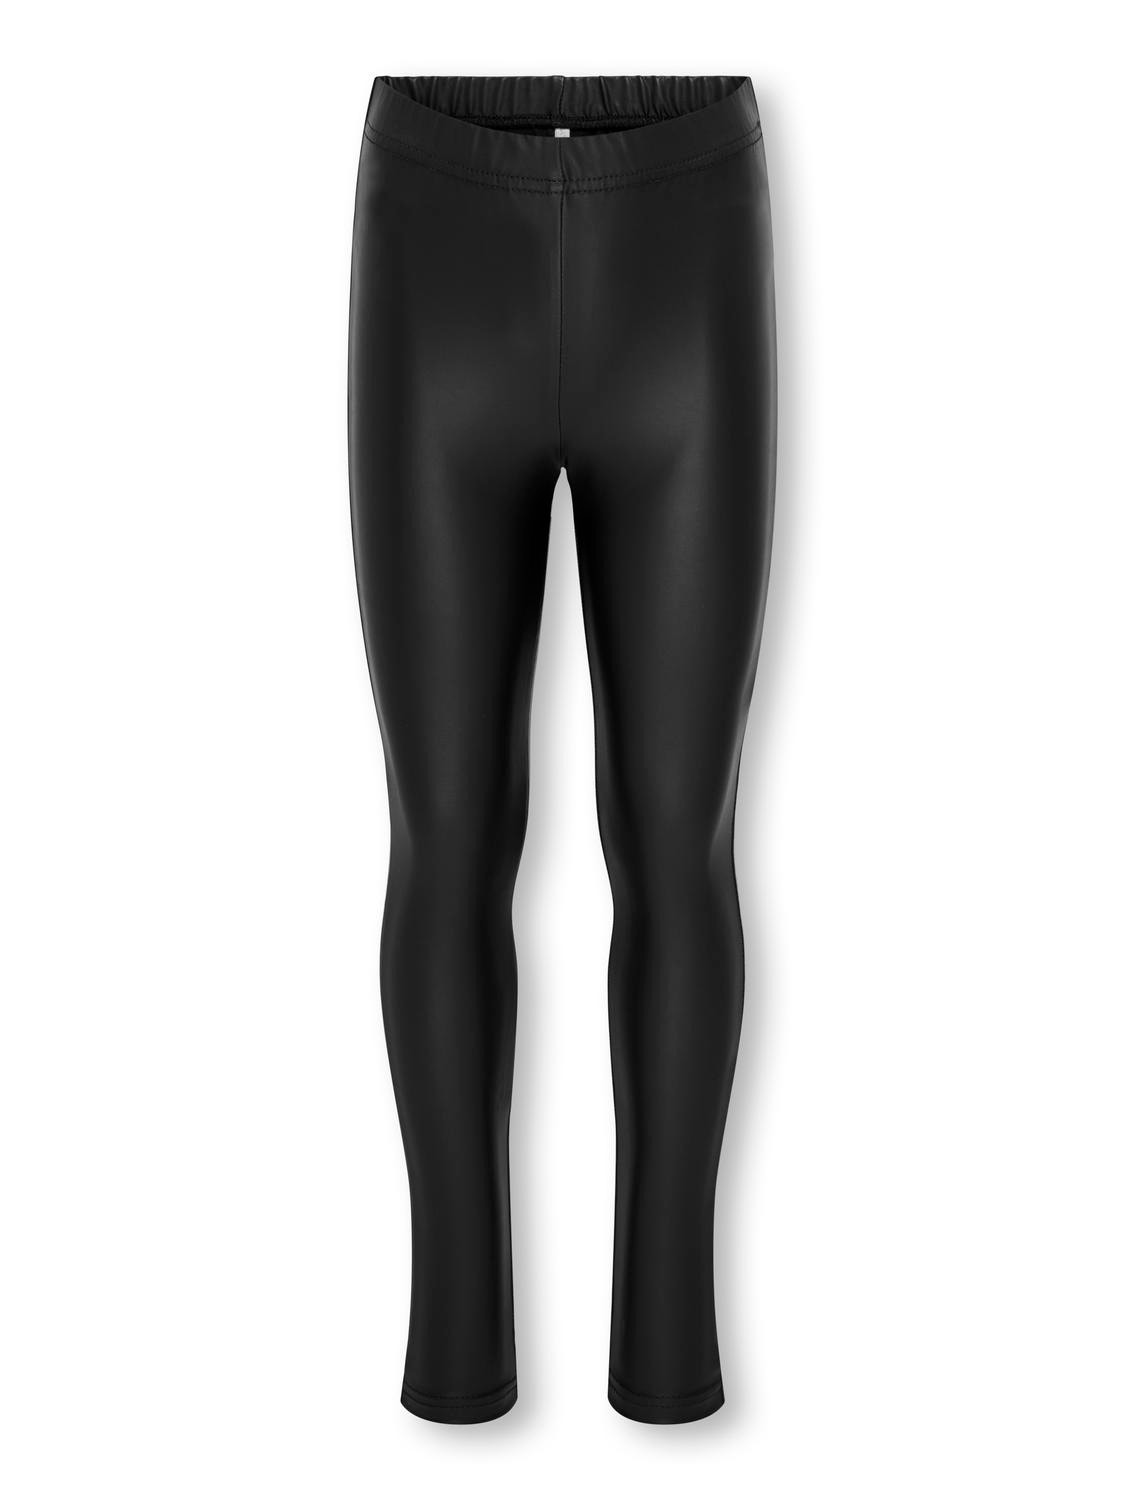 ONLY Tight fit Mid waist Legging -Black - 15218508